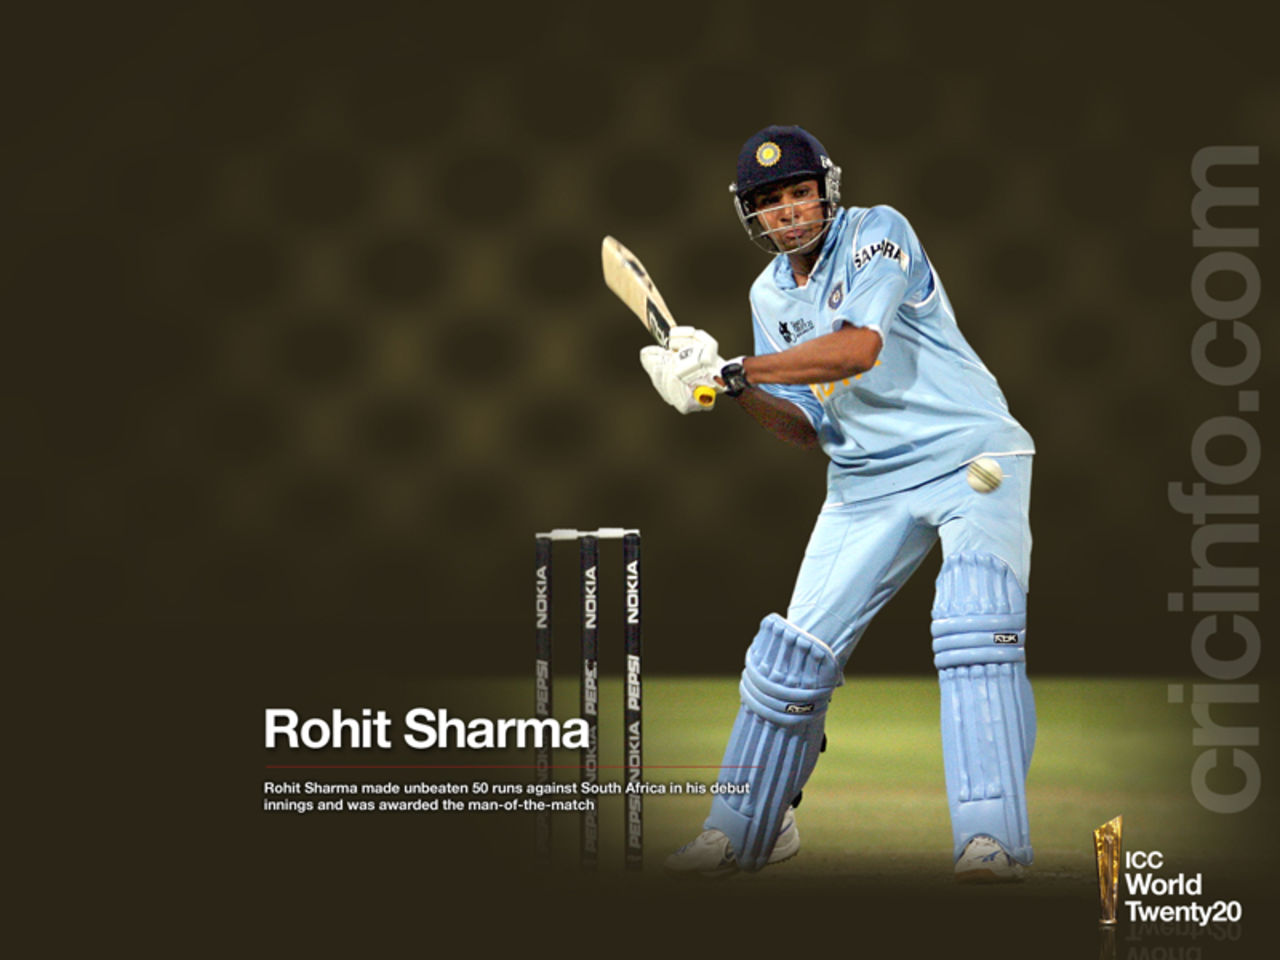 Rohit Sharma produced an excellent debut innings